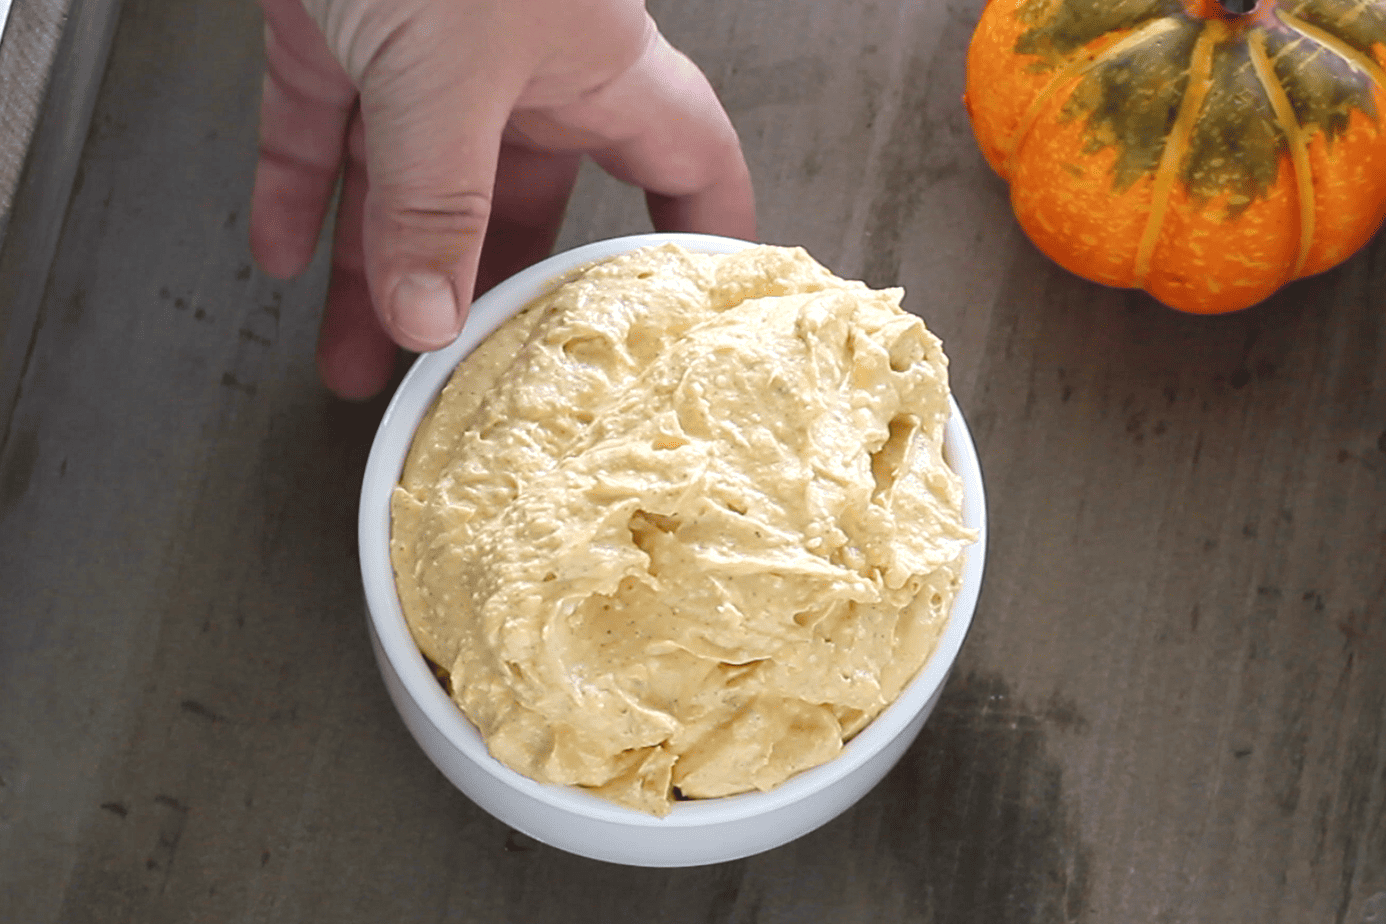 placing a bowl of pumpkin dip on the tray